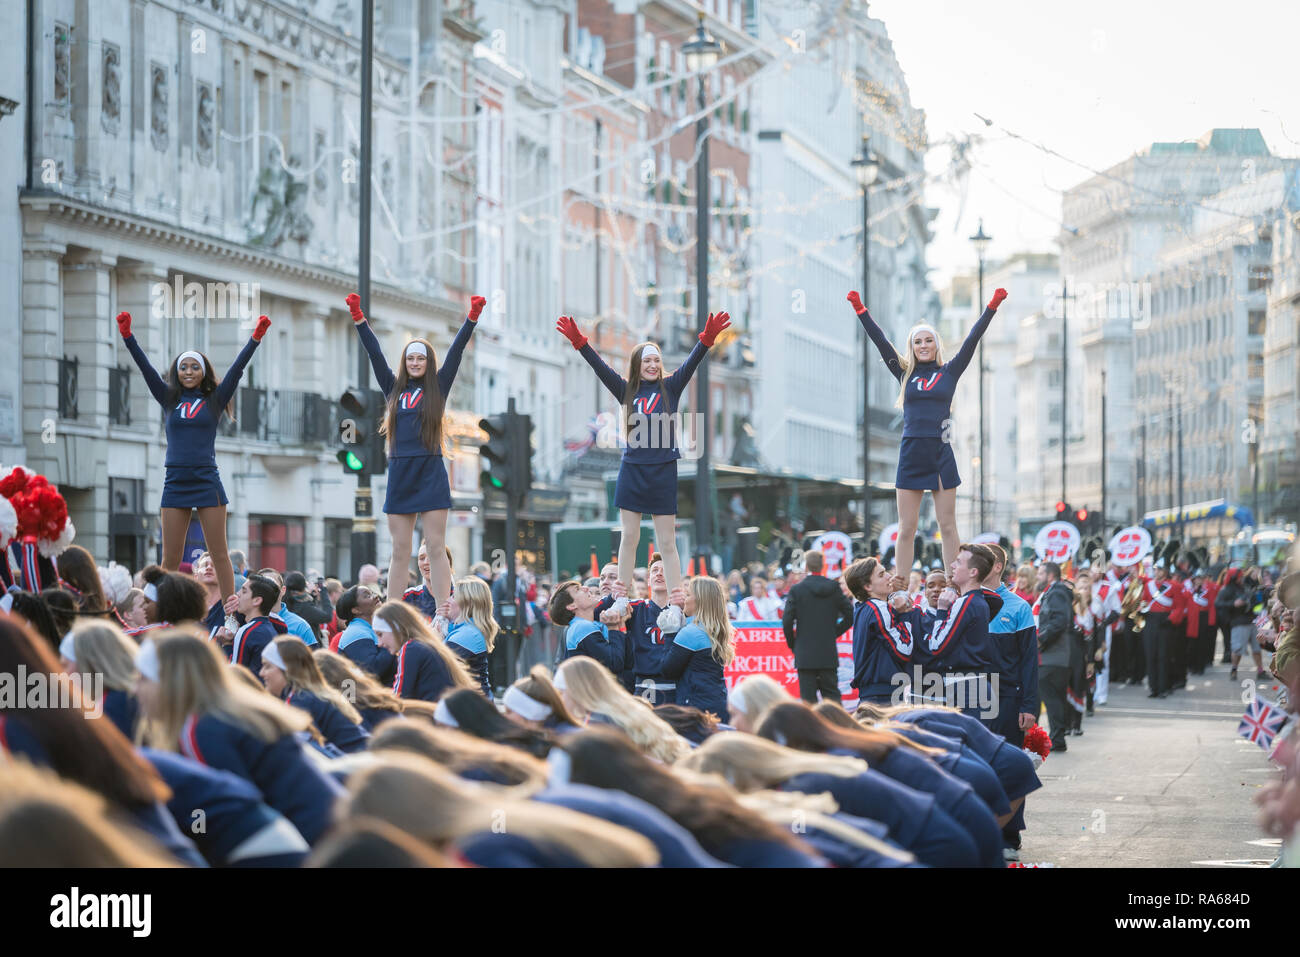 London, UK.  1 January 2019.   The theme of the parade this year was “London Welcomes the World”. With thousands of performers from a multitude of different countries and cultures from all around the world parade through central  London. Acts included the Varsity Spirit All-American Universal & National Cheerleaders Association.  Credit: Ilyas Ayub / Alamy Live News Stock Photo